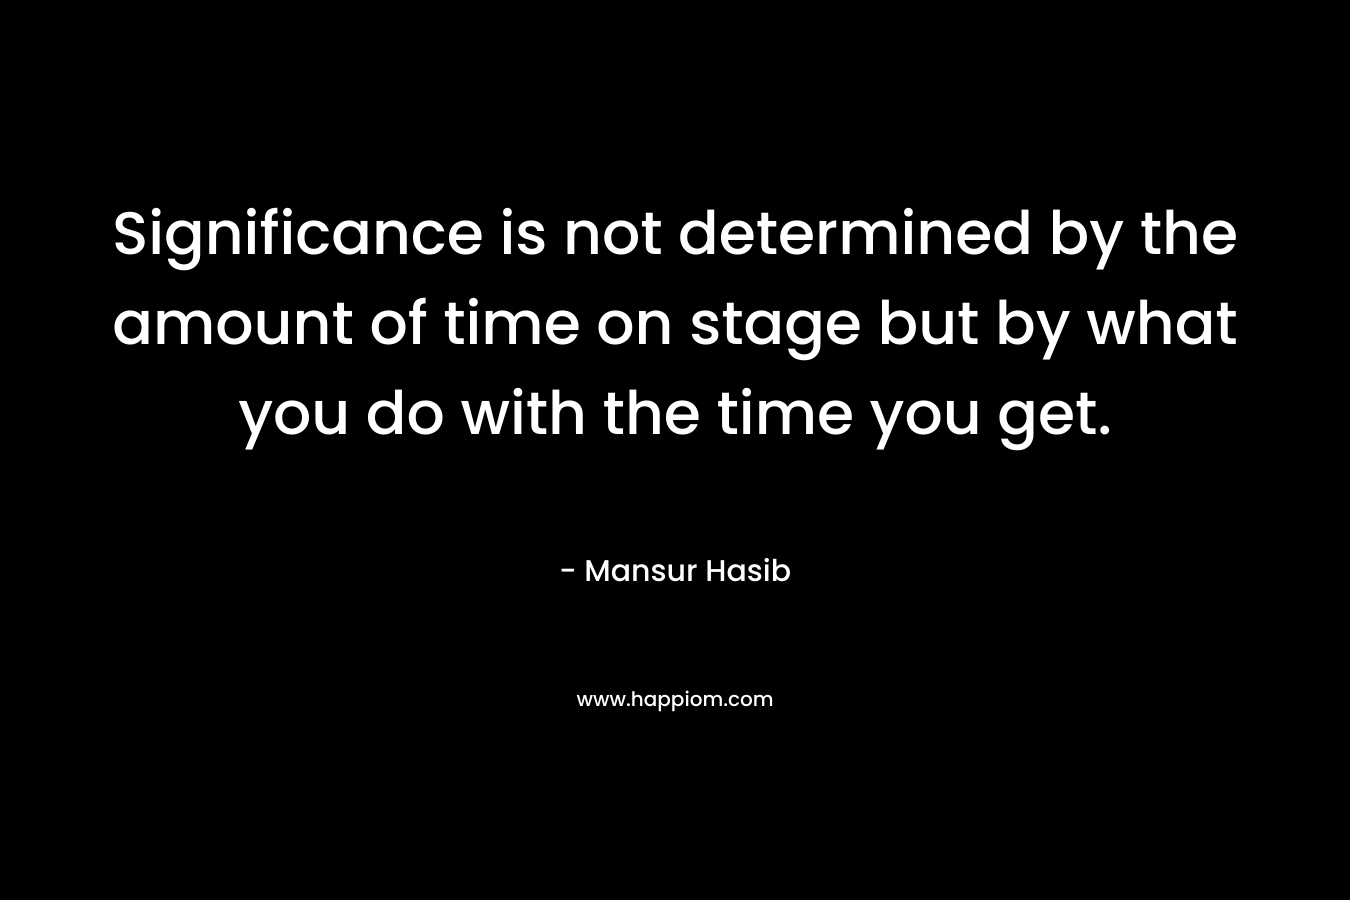 Significance is not determined by the amount of time on stage but by what you do with the time you get. – Mansur Hasib